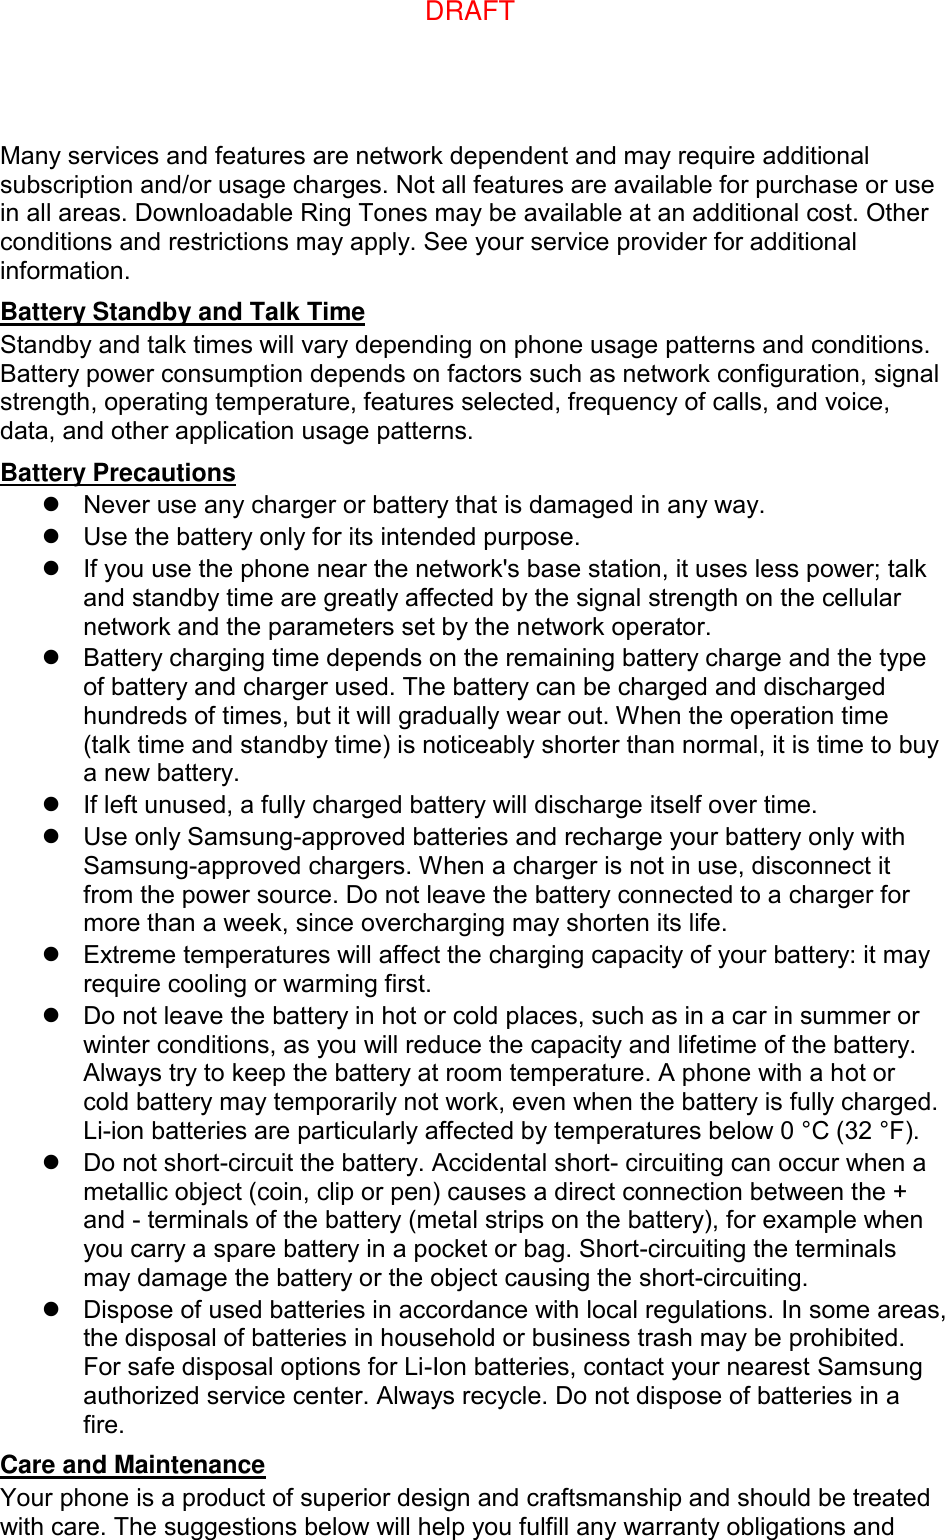 Many services and features are network dependent and may require additional subscription and/or usage charges. Not all features are available for purchase or use in all areas. Downloadable Ring Tones may be available at an additional cost. Other conditions and restrictions may apply. See your service provider for additional information. Battery Standby and Talk Time Standby and talk times will vary depending on phone usage patterns and conditions. Battery power consumption depends on factors such as network configuration, signal strength, operating temperature, features selected, frequency of calls, and voice, data, and other application usage patterns.   Battery Precautions   Never use any charger or battery that is damaged in any way.   Use the battery only for its intended purpose.   If you use the phone near the network&apos;s base station, it uses less power; talk and standby time are greatly affected by the signal strength on the cellular network and the parameters set by the network operator.   Battery charging time depends on the remaining battery charge and the type of battery and charger used. The battery can be charged and discharged hundreds of times, but it will gradually wear out. When the operation time (talk time and standby time) is noticeably shorter than normal, it is time to buy a new battery.   If left unused, a fully charged battery will discharge itself over time.   Use only Samsung-approved batteries and recharge your battery only with Samsung-approved chargers. When a charger is not in use, disconnect it from the power source. Do not leave the battery connected to a charger for more than a week, since overcharging may shorten its life.   Extreme temperatures will affect the charging capacity of your battery: it may require cooling or warming first.   Do not leave the battery in hot or cold places, such as in a car in summer or winter conditions, as you will reduce the capacity and lifetime of the battery. Always try to keep the battery at room temperature. A phone with a hot or cold battery may temporarily not work, even when the battery is fully charged. Li-ion batteries are particularly affected by temperatures below 0 °C (32 °F).   Do not short-circuit the battery. Accidental short- circuiting can occur when a metallic object (coin, clip or pen) causes a direct connection between the + and - terminals of the battery (metal strips on the battery), for example when you carry a spare battery in a pocket or bag. Short-circuiting the terminals may damage the battery or the object causing the short-circuiting.   Dispose of used batteries in accordance with local regulations. In some areas, the disposal of batteries in household or business trash may be prohibited. For safe disposal options for Li-Ion batteries, contact your nearest Samsung authorized service center. Always recycle. Do not dispose of batteries in a fire. Care and Maintenance Your phone is a product of superior design and craftsmanship and should be treated with care. The suggestions below will help you fulfill any warranty obligations and DRAFT